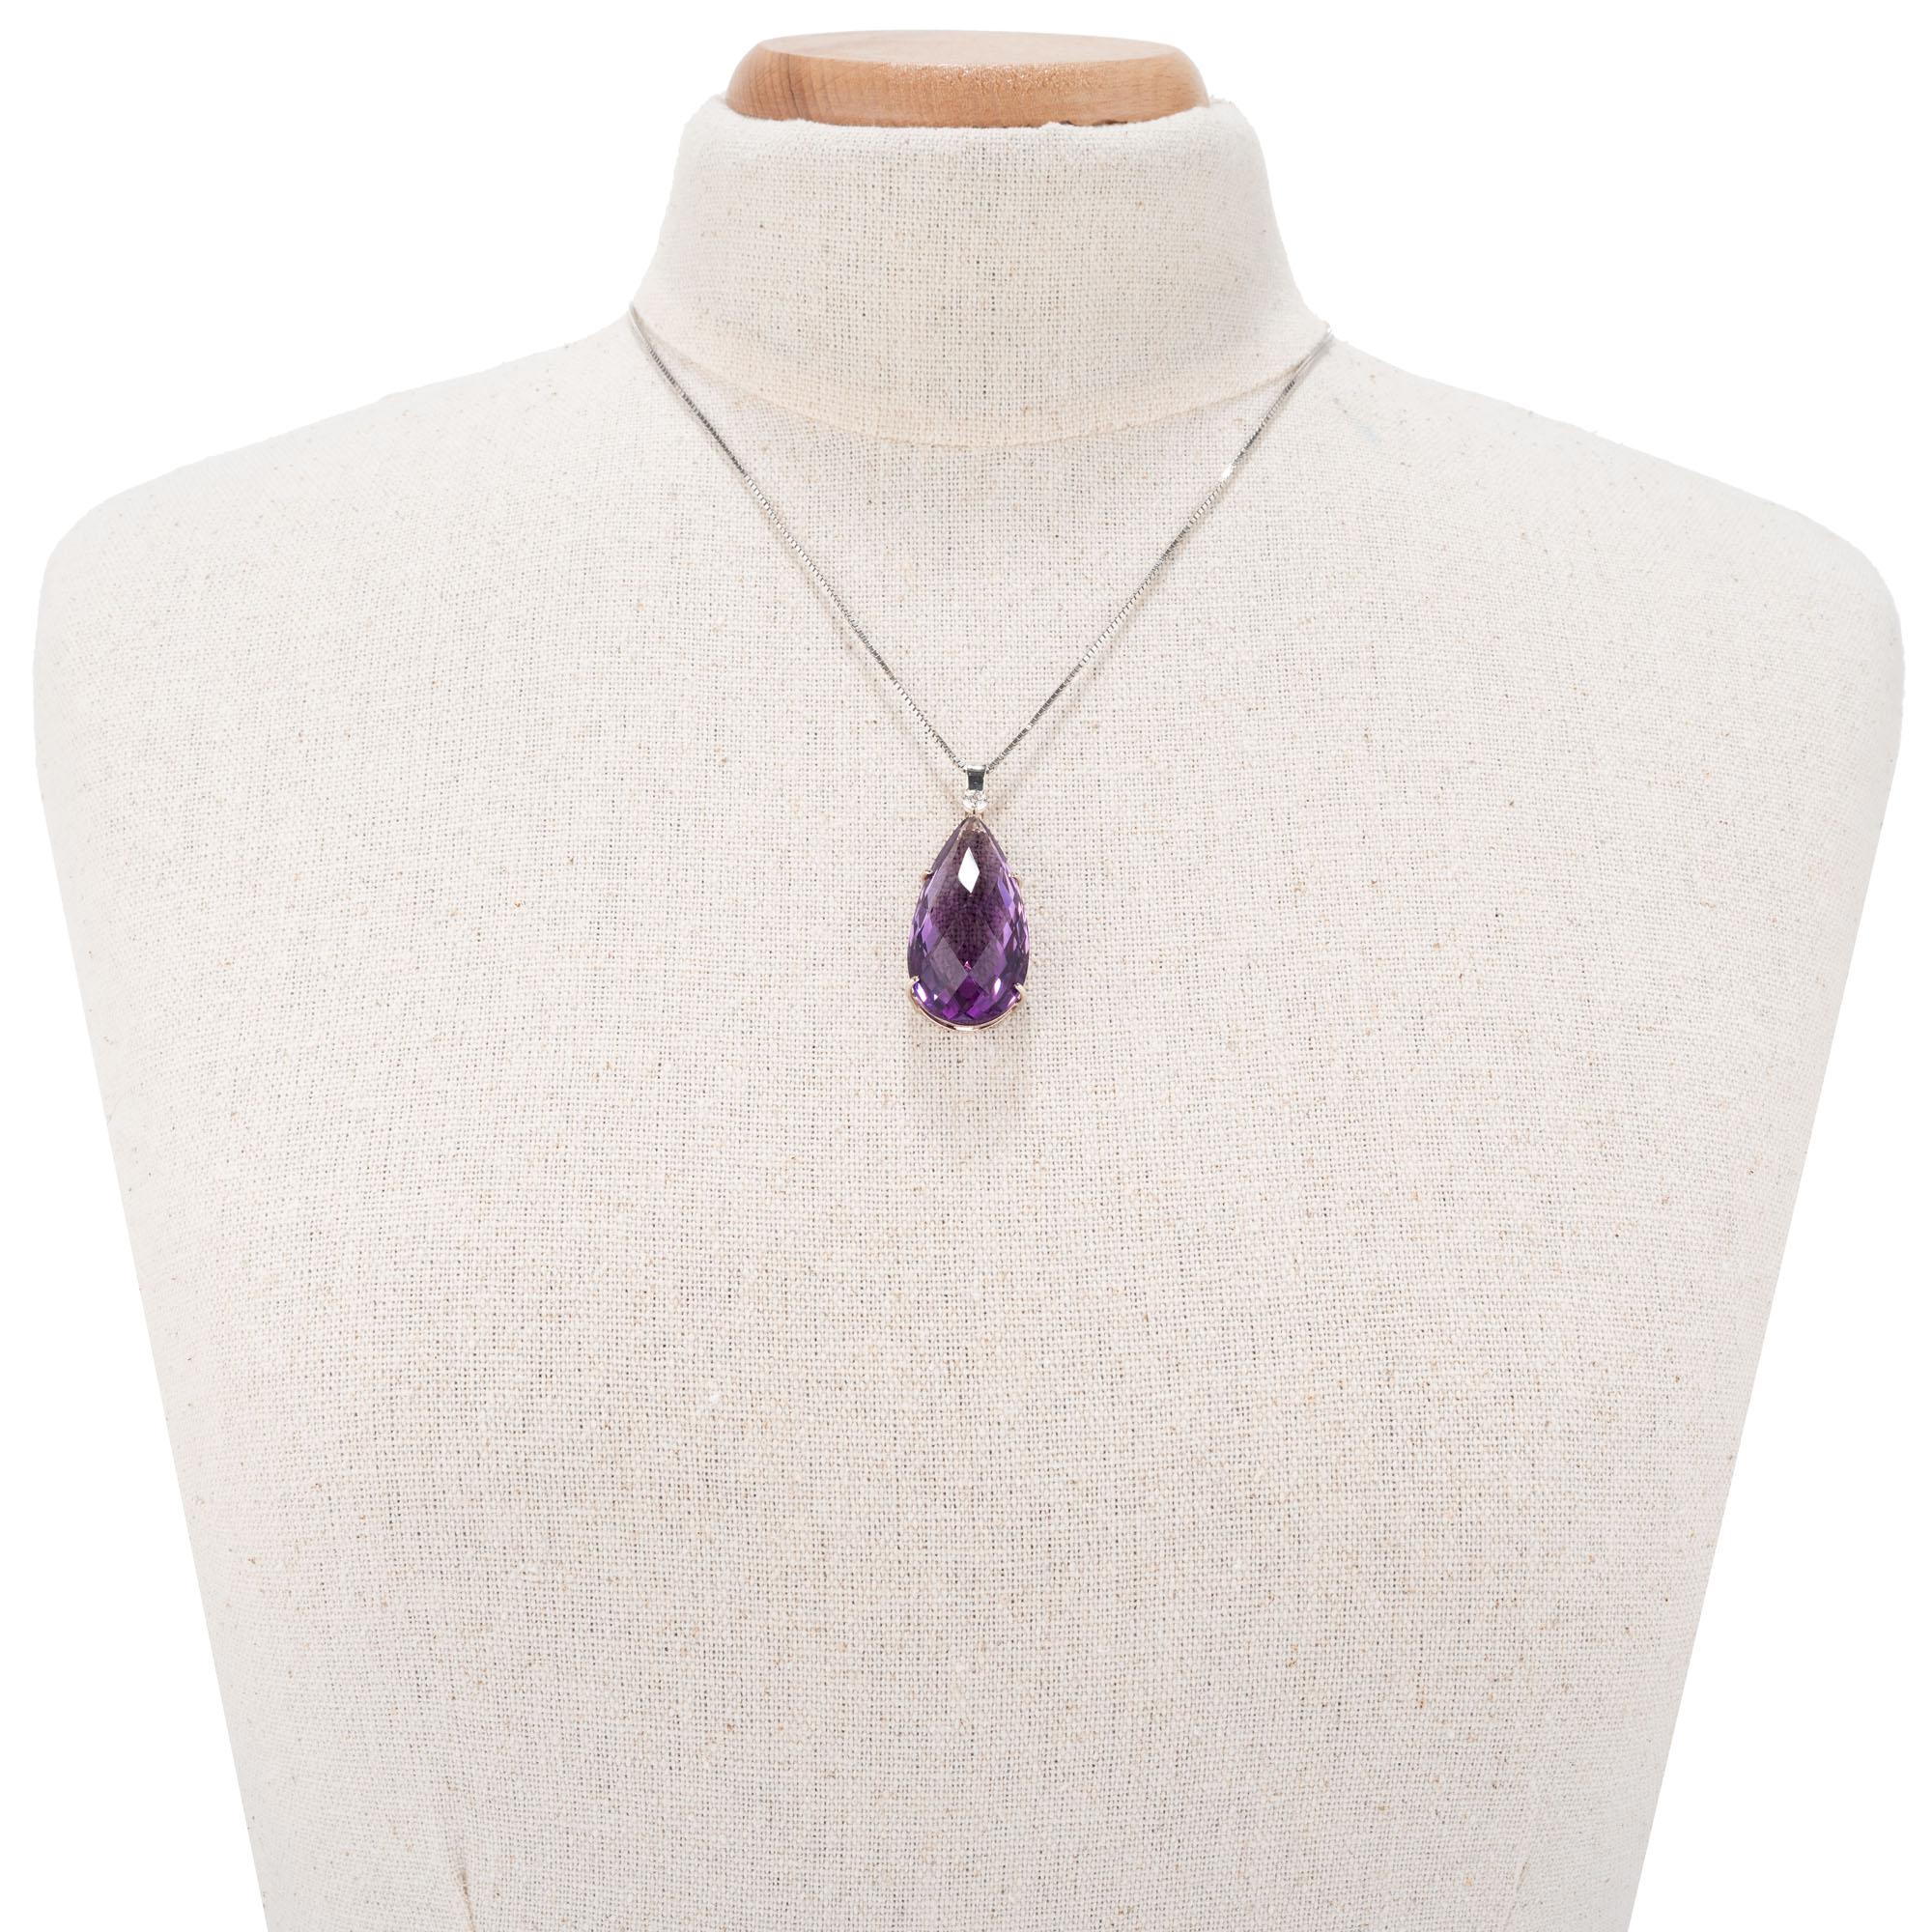 Peter Suchy 36.16 Carat Amethyst Diamond White Gold Pendant Necklace In New Condition For Sale In Stamford, CT